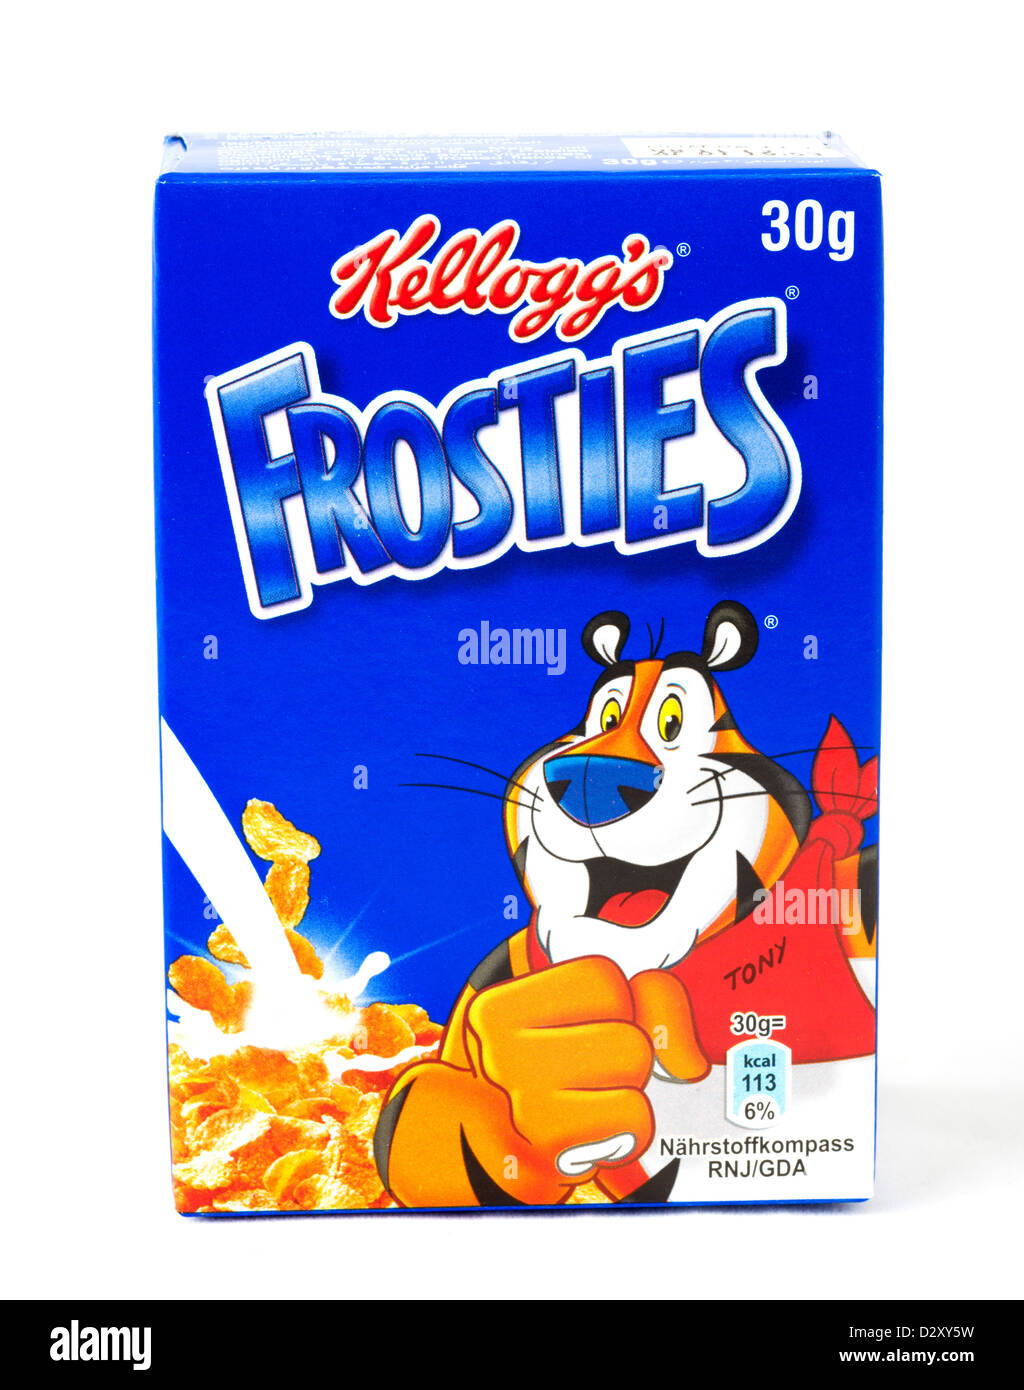 Small pack of Kellogg's Frosties breakfast cereal Stock Photo